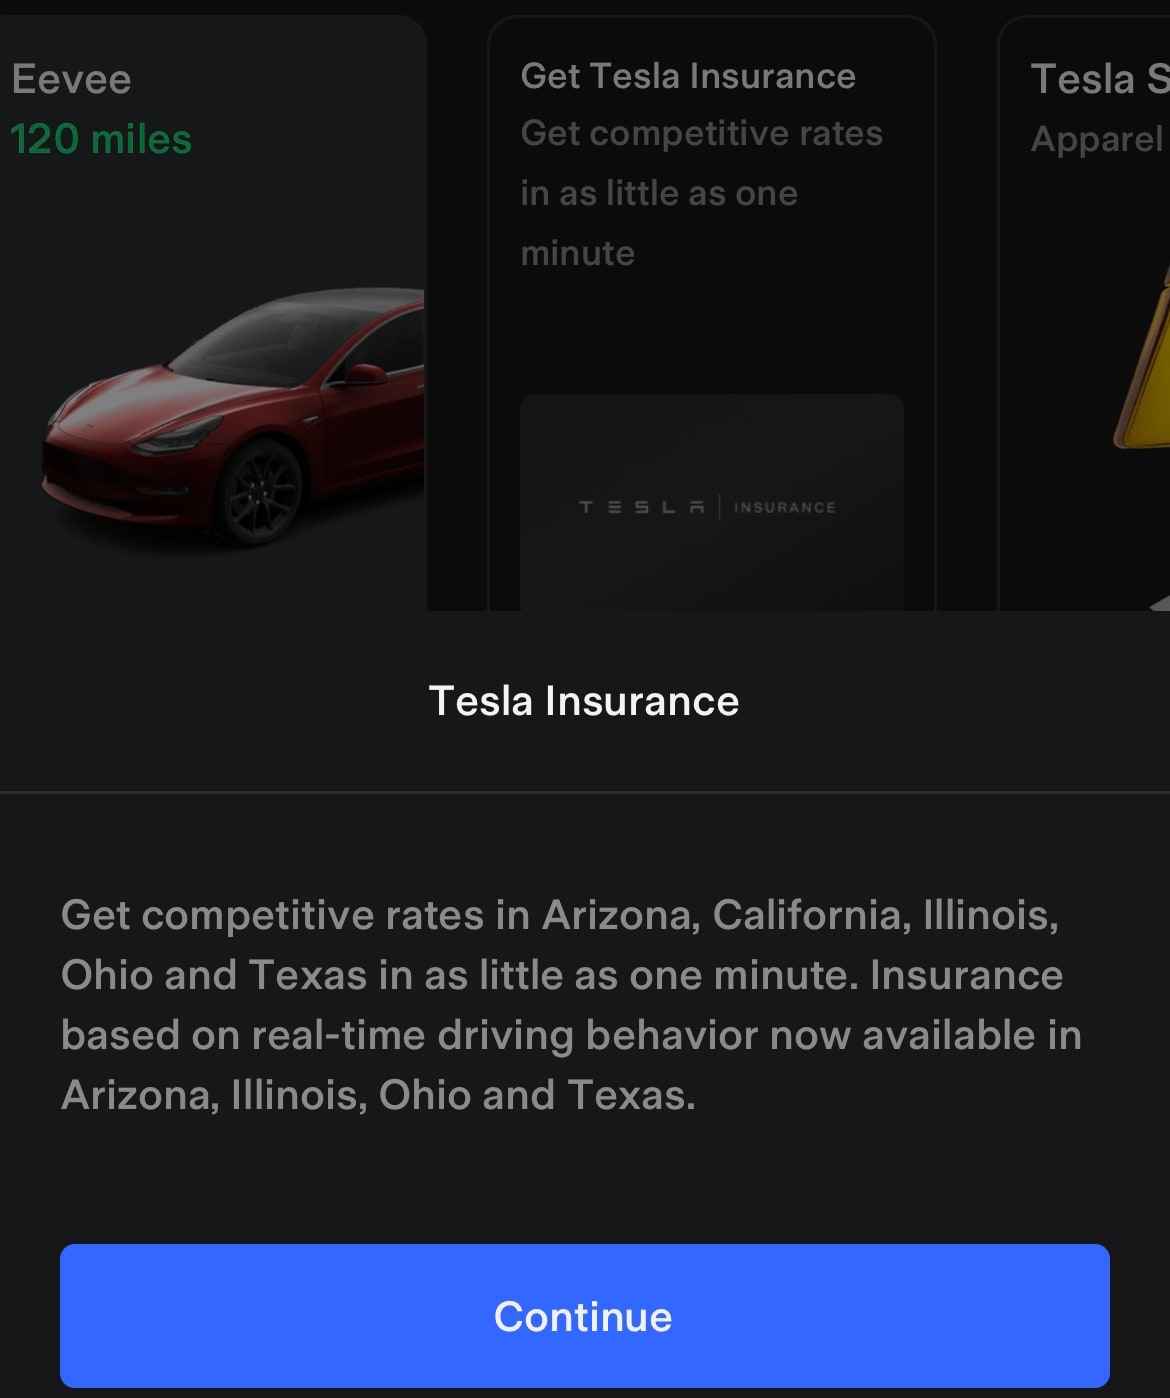 Tesla Sign Up for Tesla Insurance feature in update 4.7.2